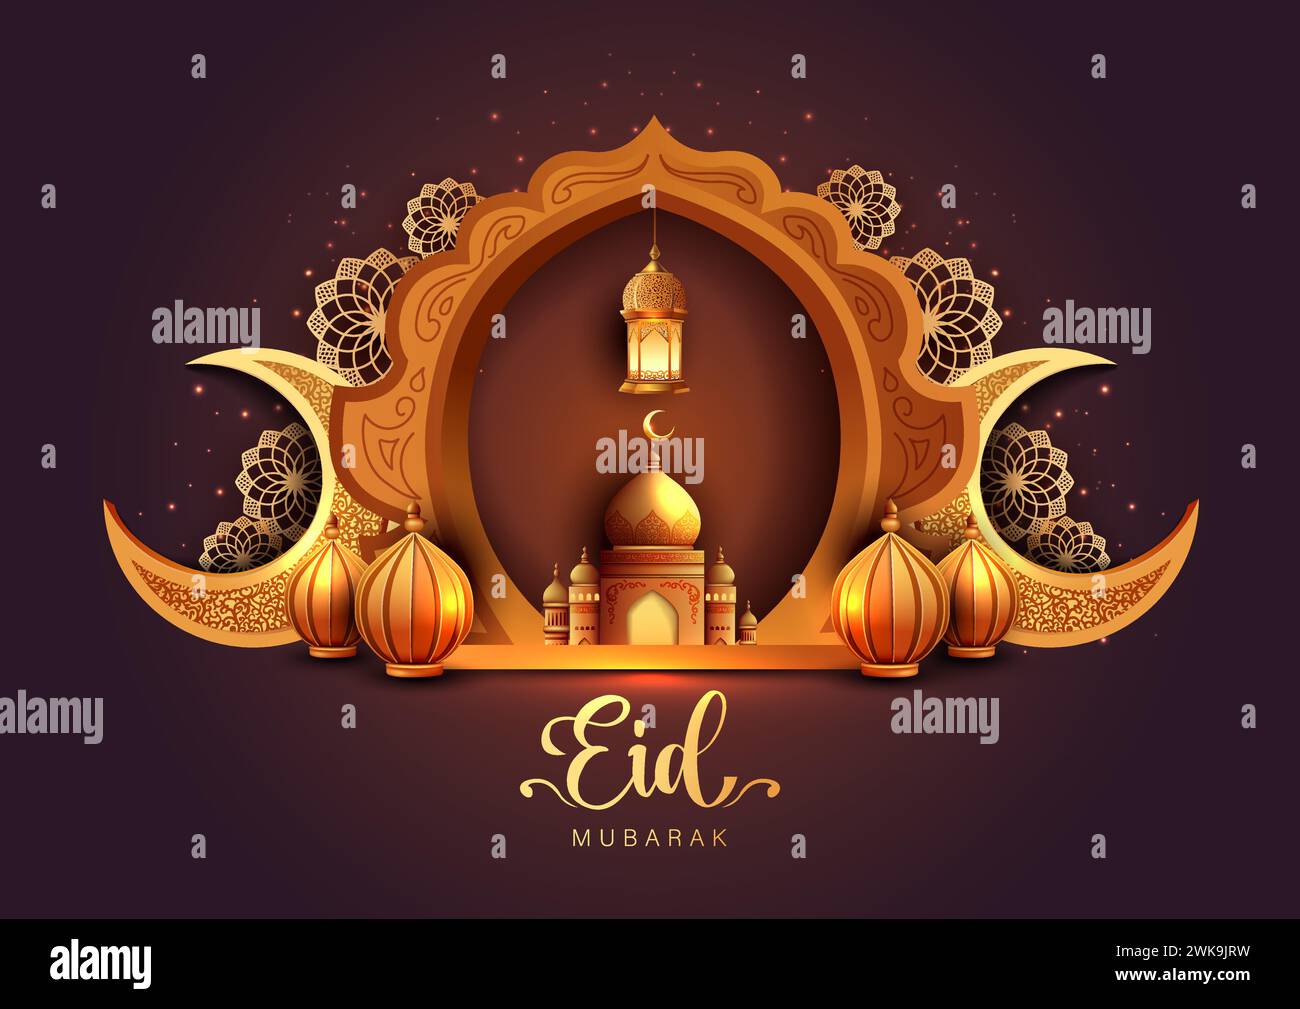 Eid Mubarak Muslim art greetings with golden mosque and brown background wallpaper. abstract vector illustration design. Stock Vector